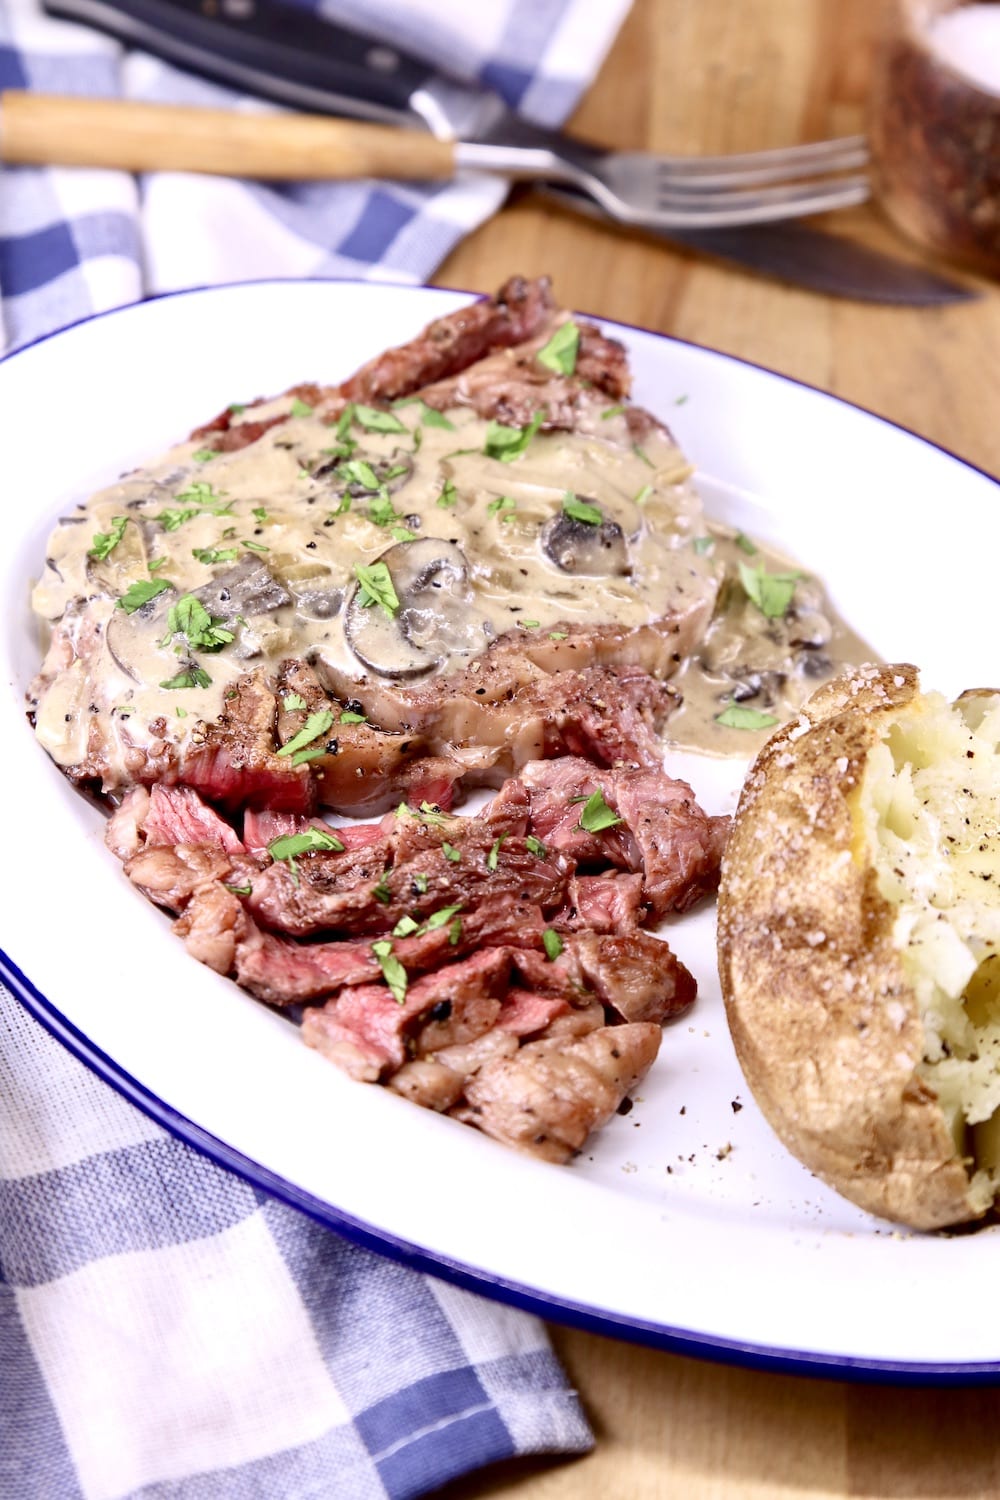 Grilled steak with mushroom cream sauce on a plate with a baked potato